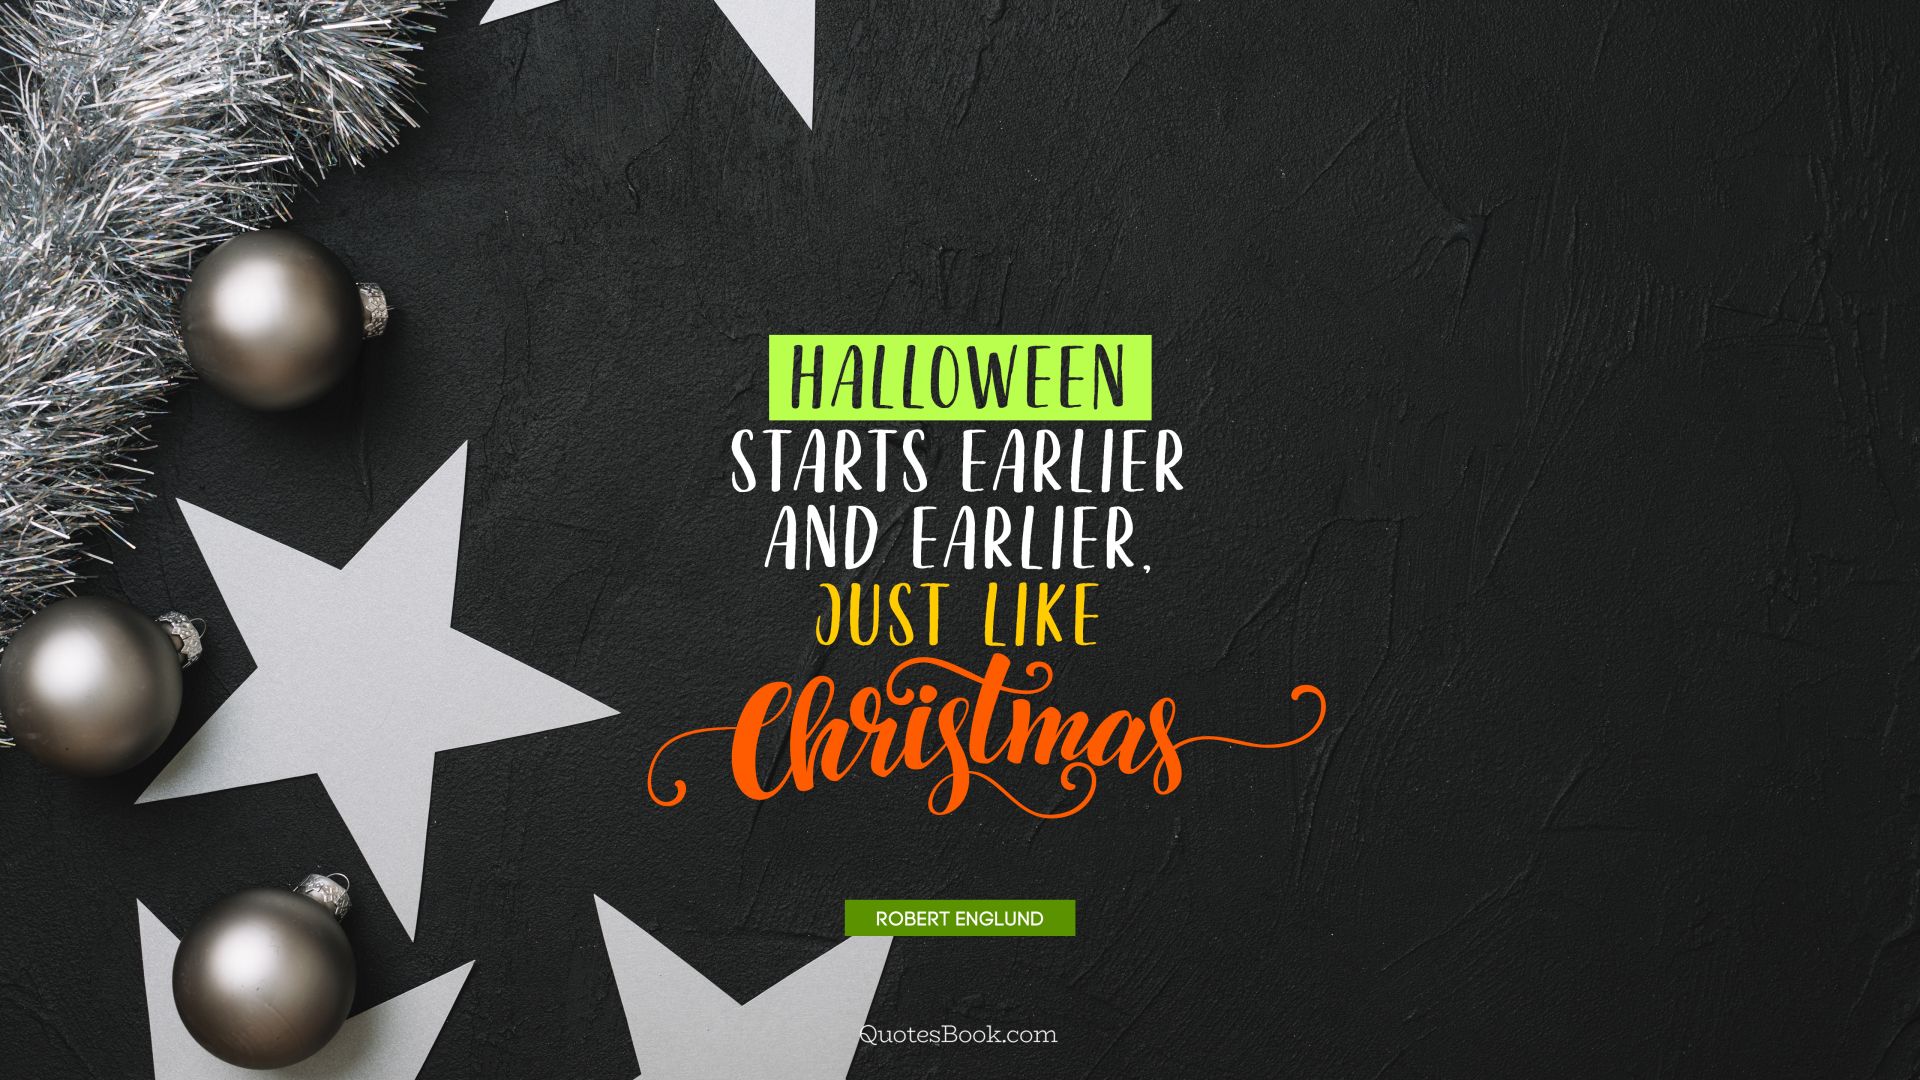 Halloween starts earlier and earlier, just like Christmas. - Quote by Robert Englund